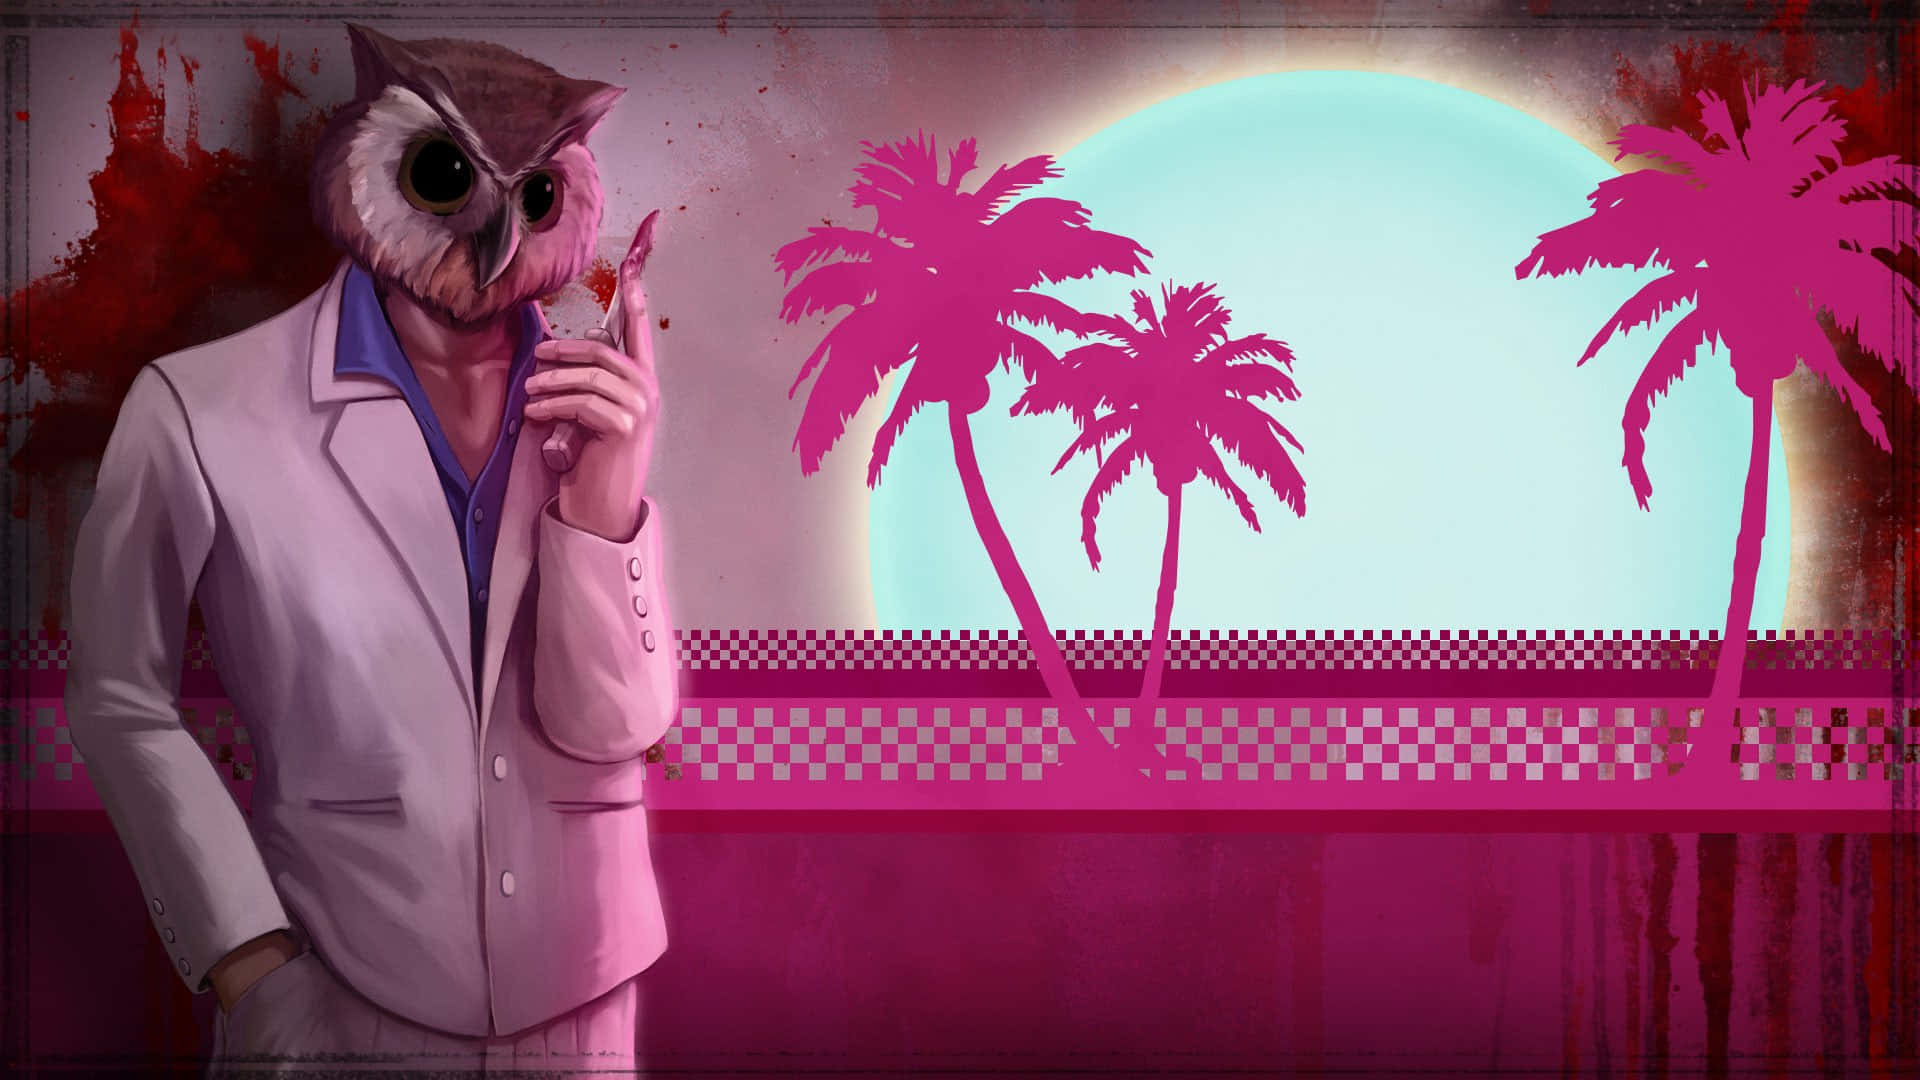 Intense Action in the World of Hotline Miami